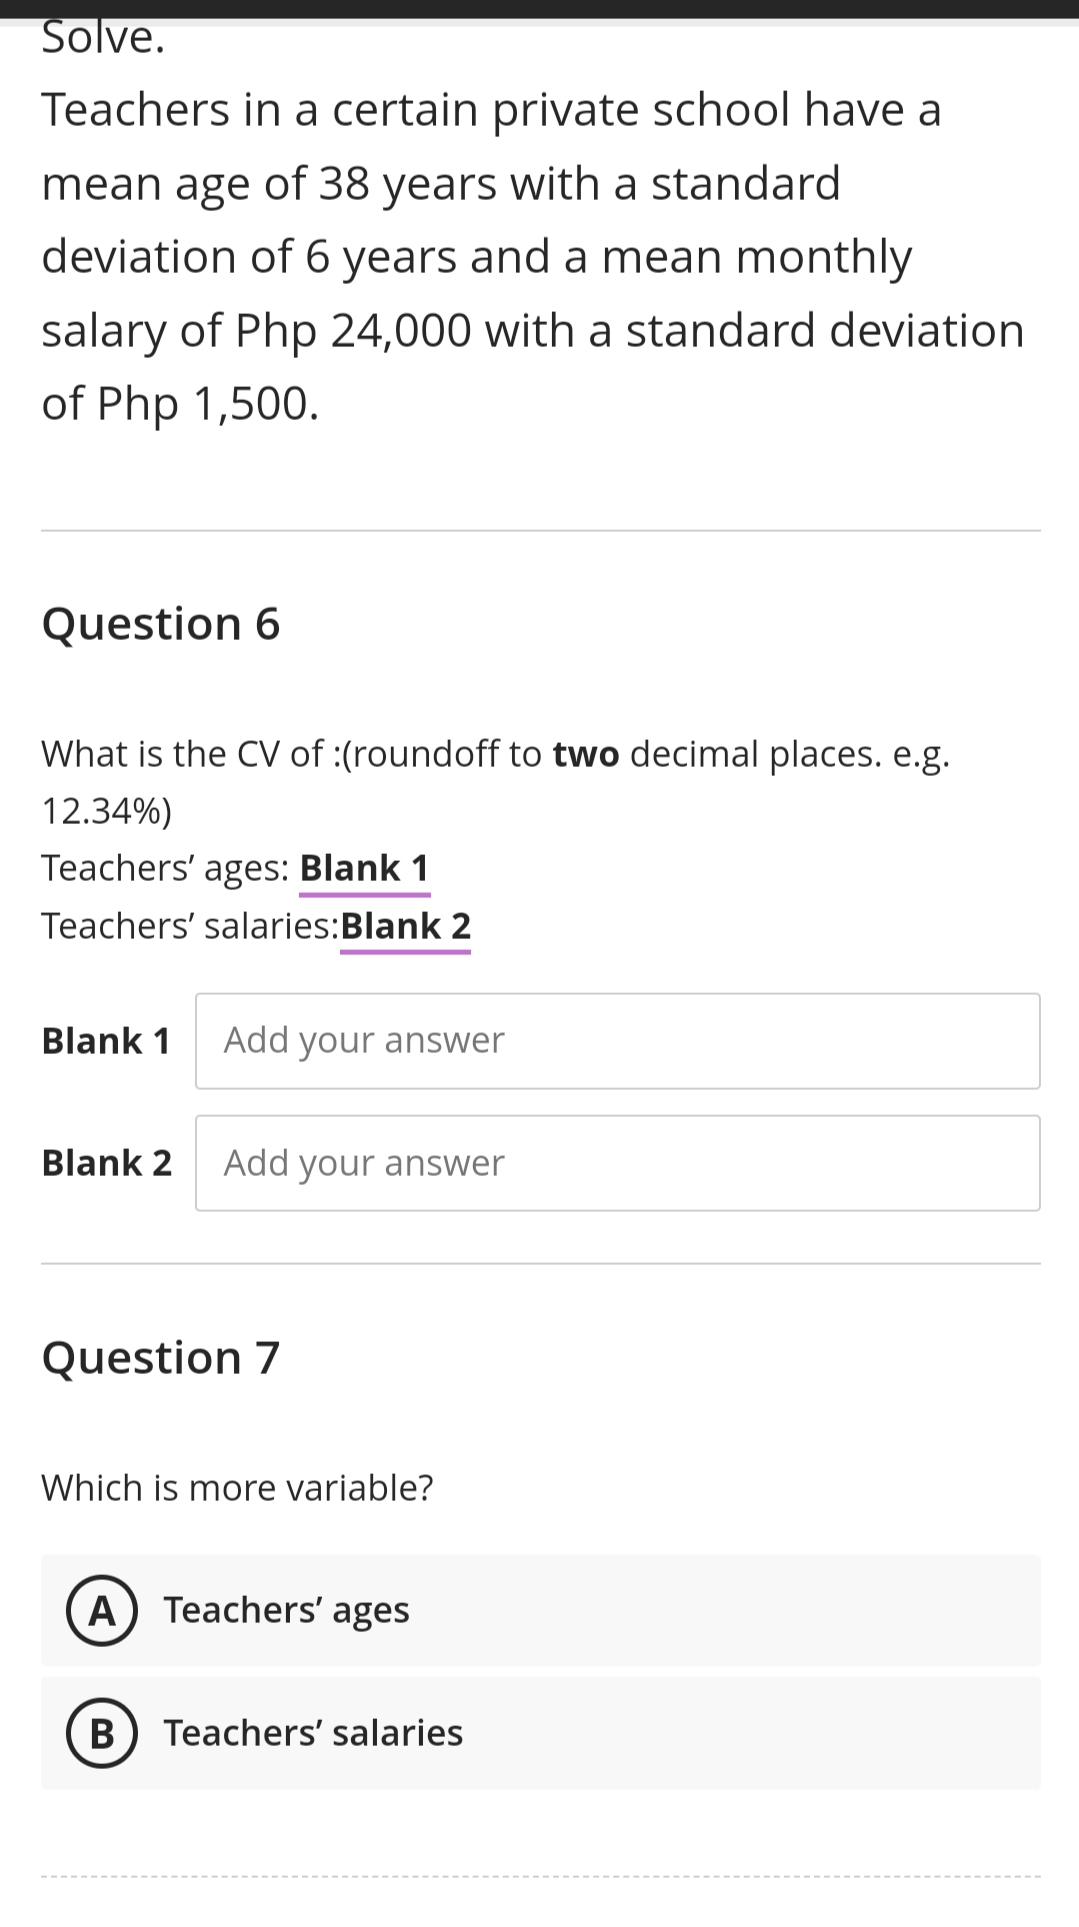 Solve.
Teachers in a certain private school have a
mean age of 38 years with a standard
deviation of 6 years and a mean monthly
salary of Php 24,000 with a standard deviation
of Php 1,500.
Question 6
What is the CV of :(roundoff to two decimal places. e.g.
12.34%)
Teachers' ages: Blank 1
Teachers' salaries:Blank 2
Blank 1
Add your answer
Blank 2
Add your answer
Question 7
Which is more variable?
A) Teachers' ages
В
Teachers' salaries
